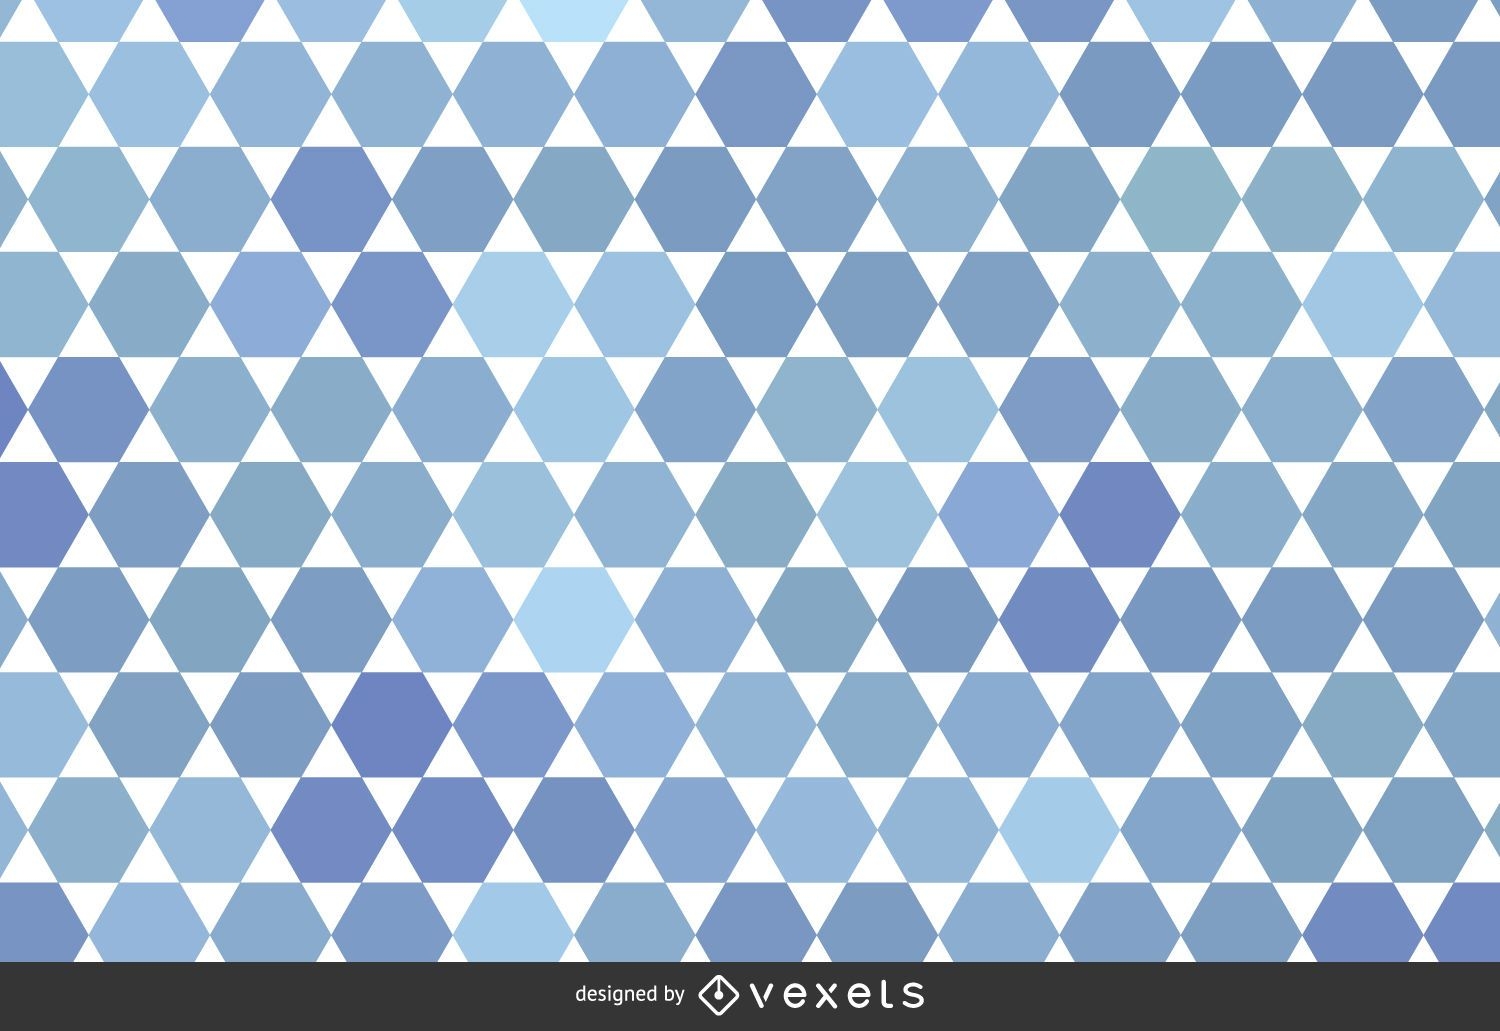 Abstract geometric pattern in tones of blue